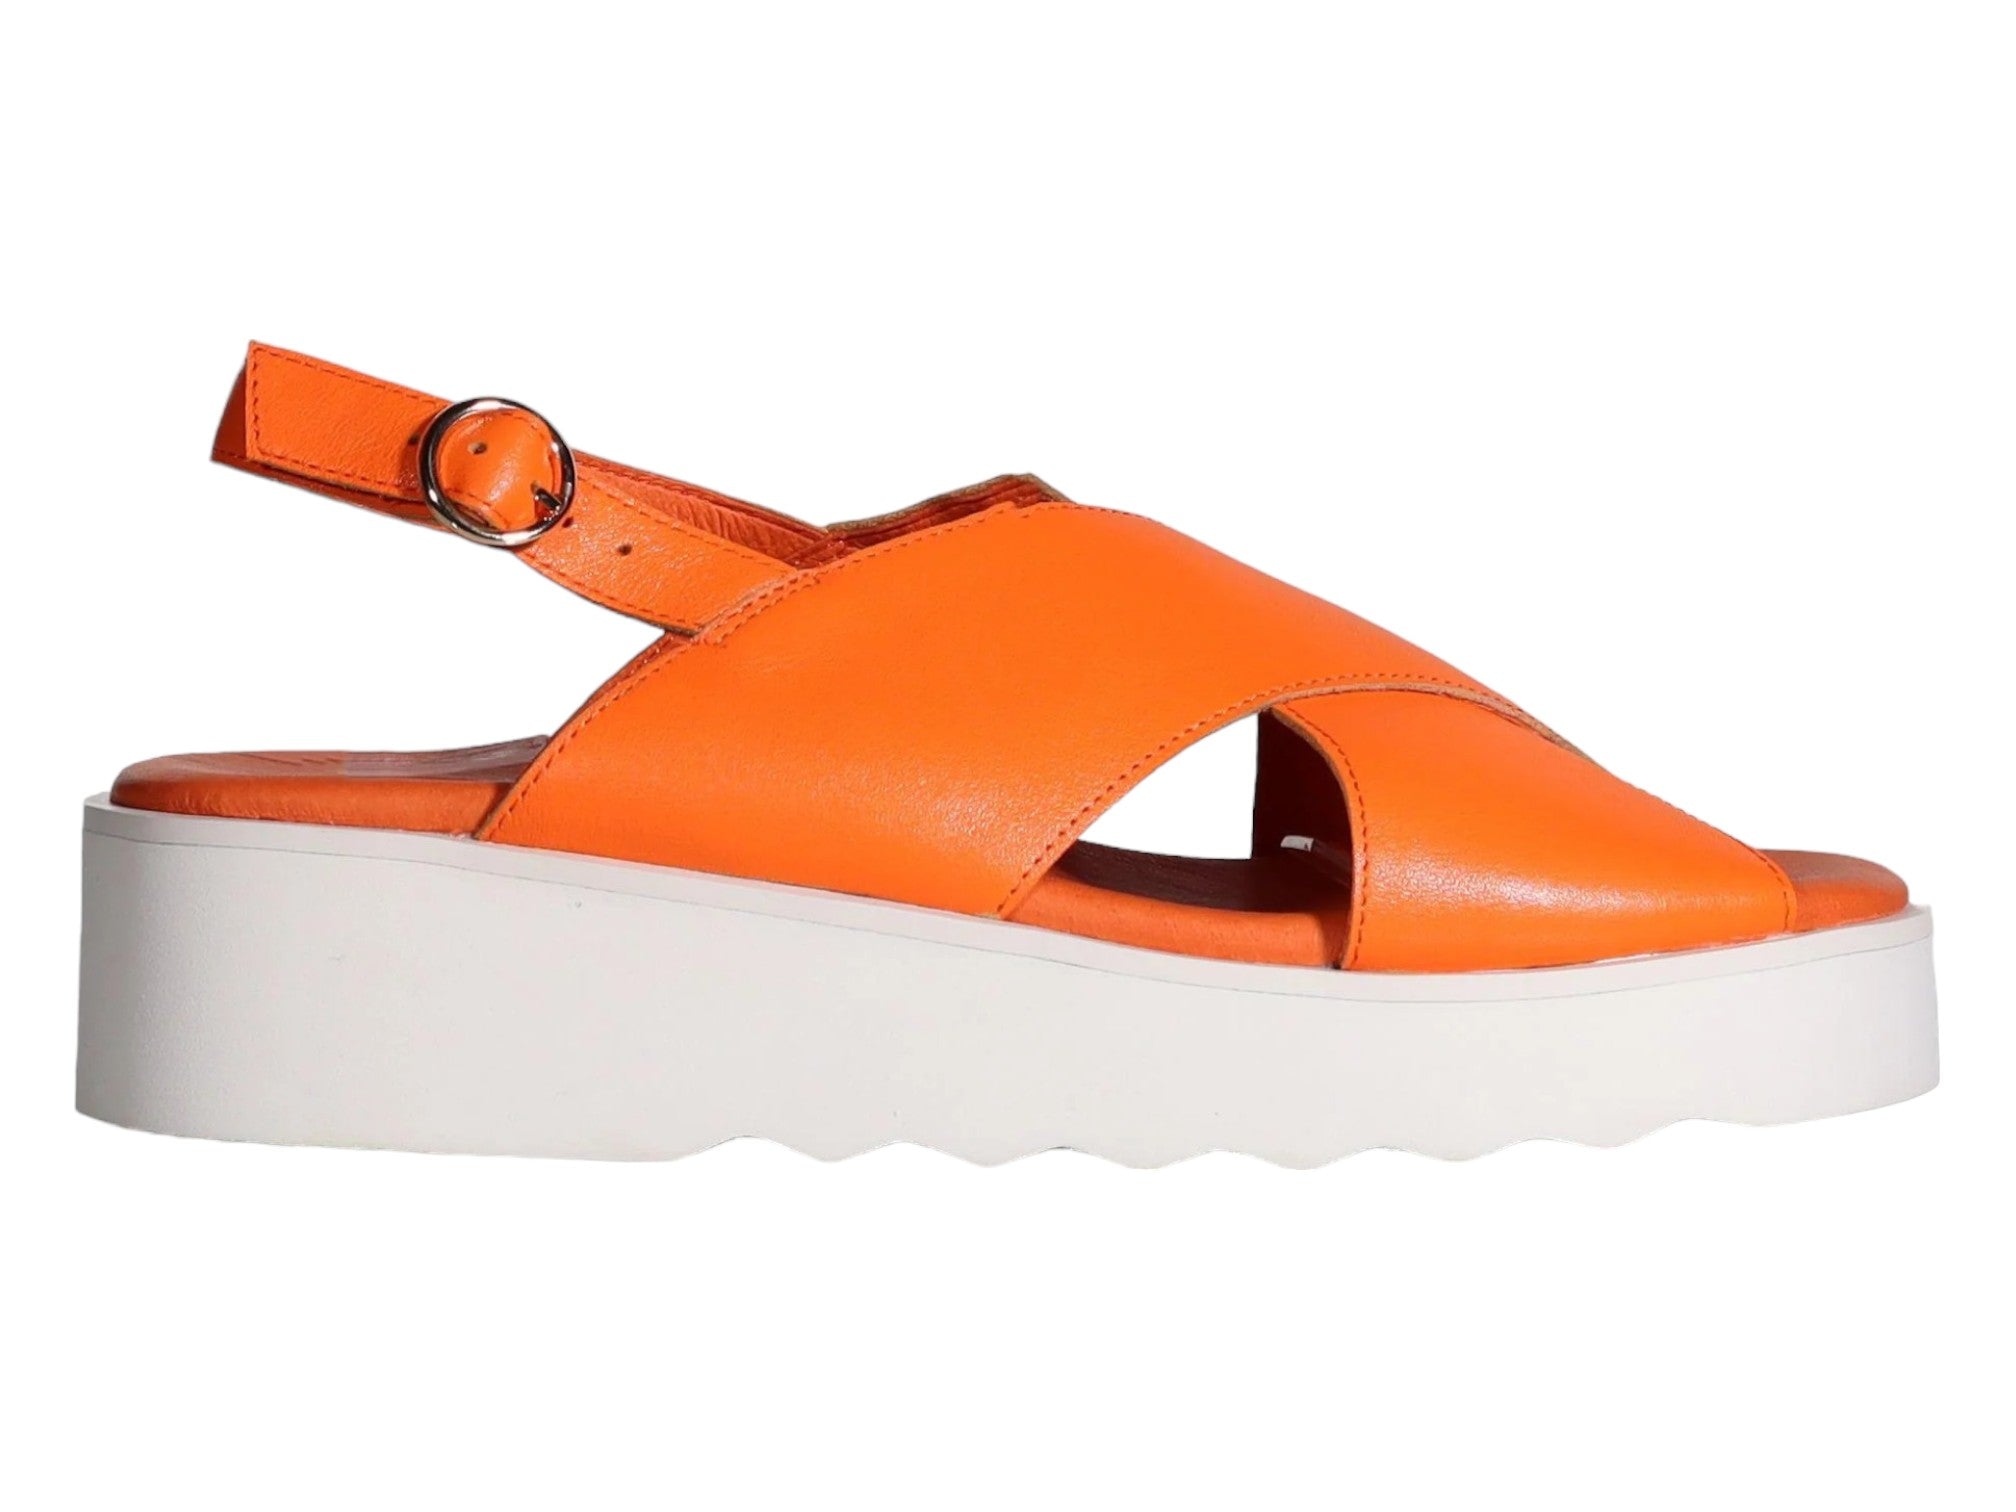 The Wedge Heel Is The Curveball Shoe Trend We're Loving This Season